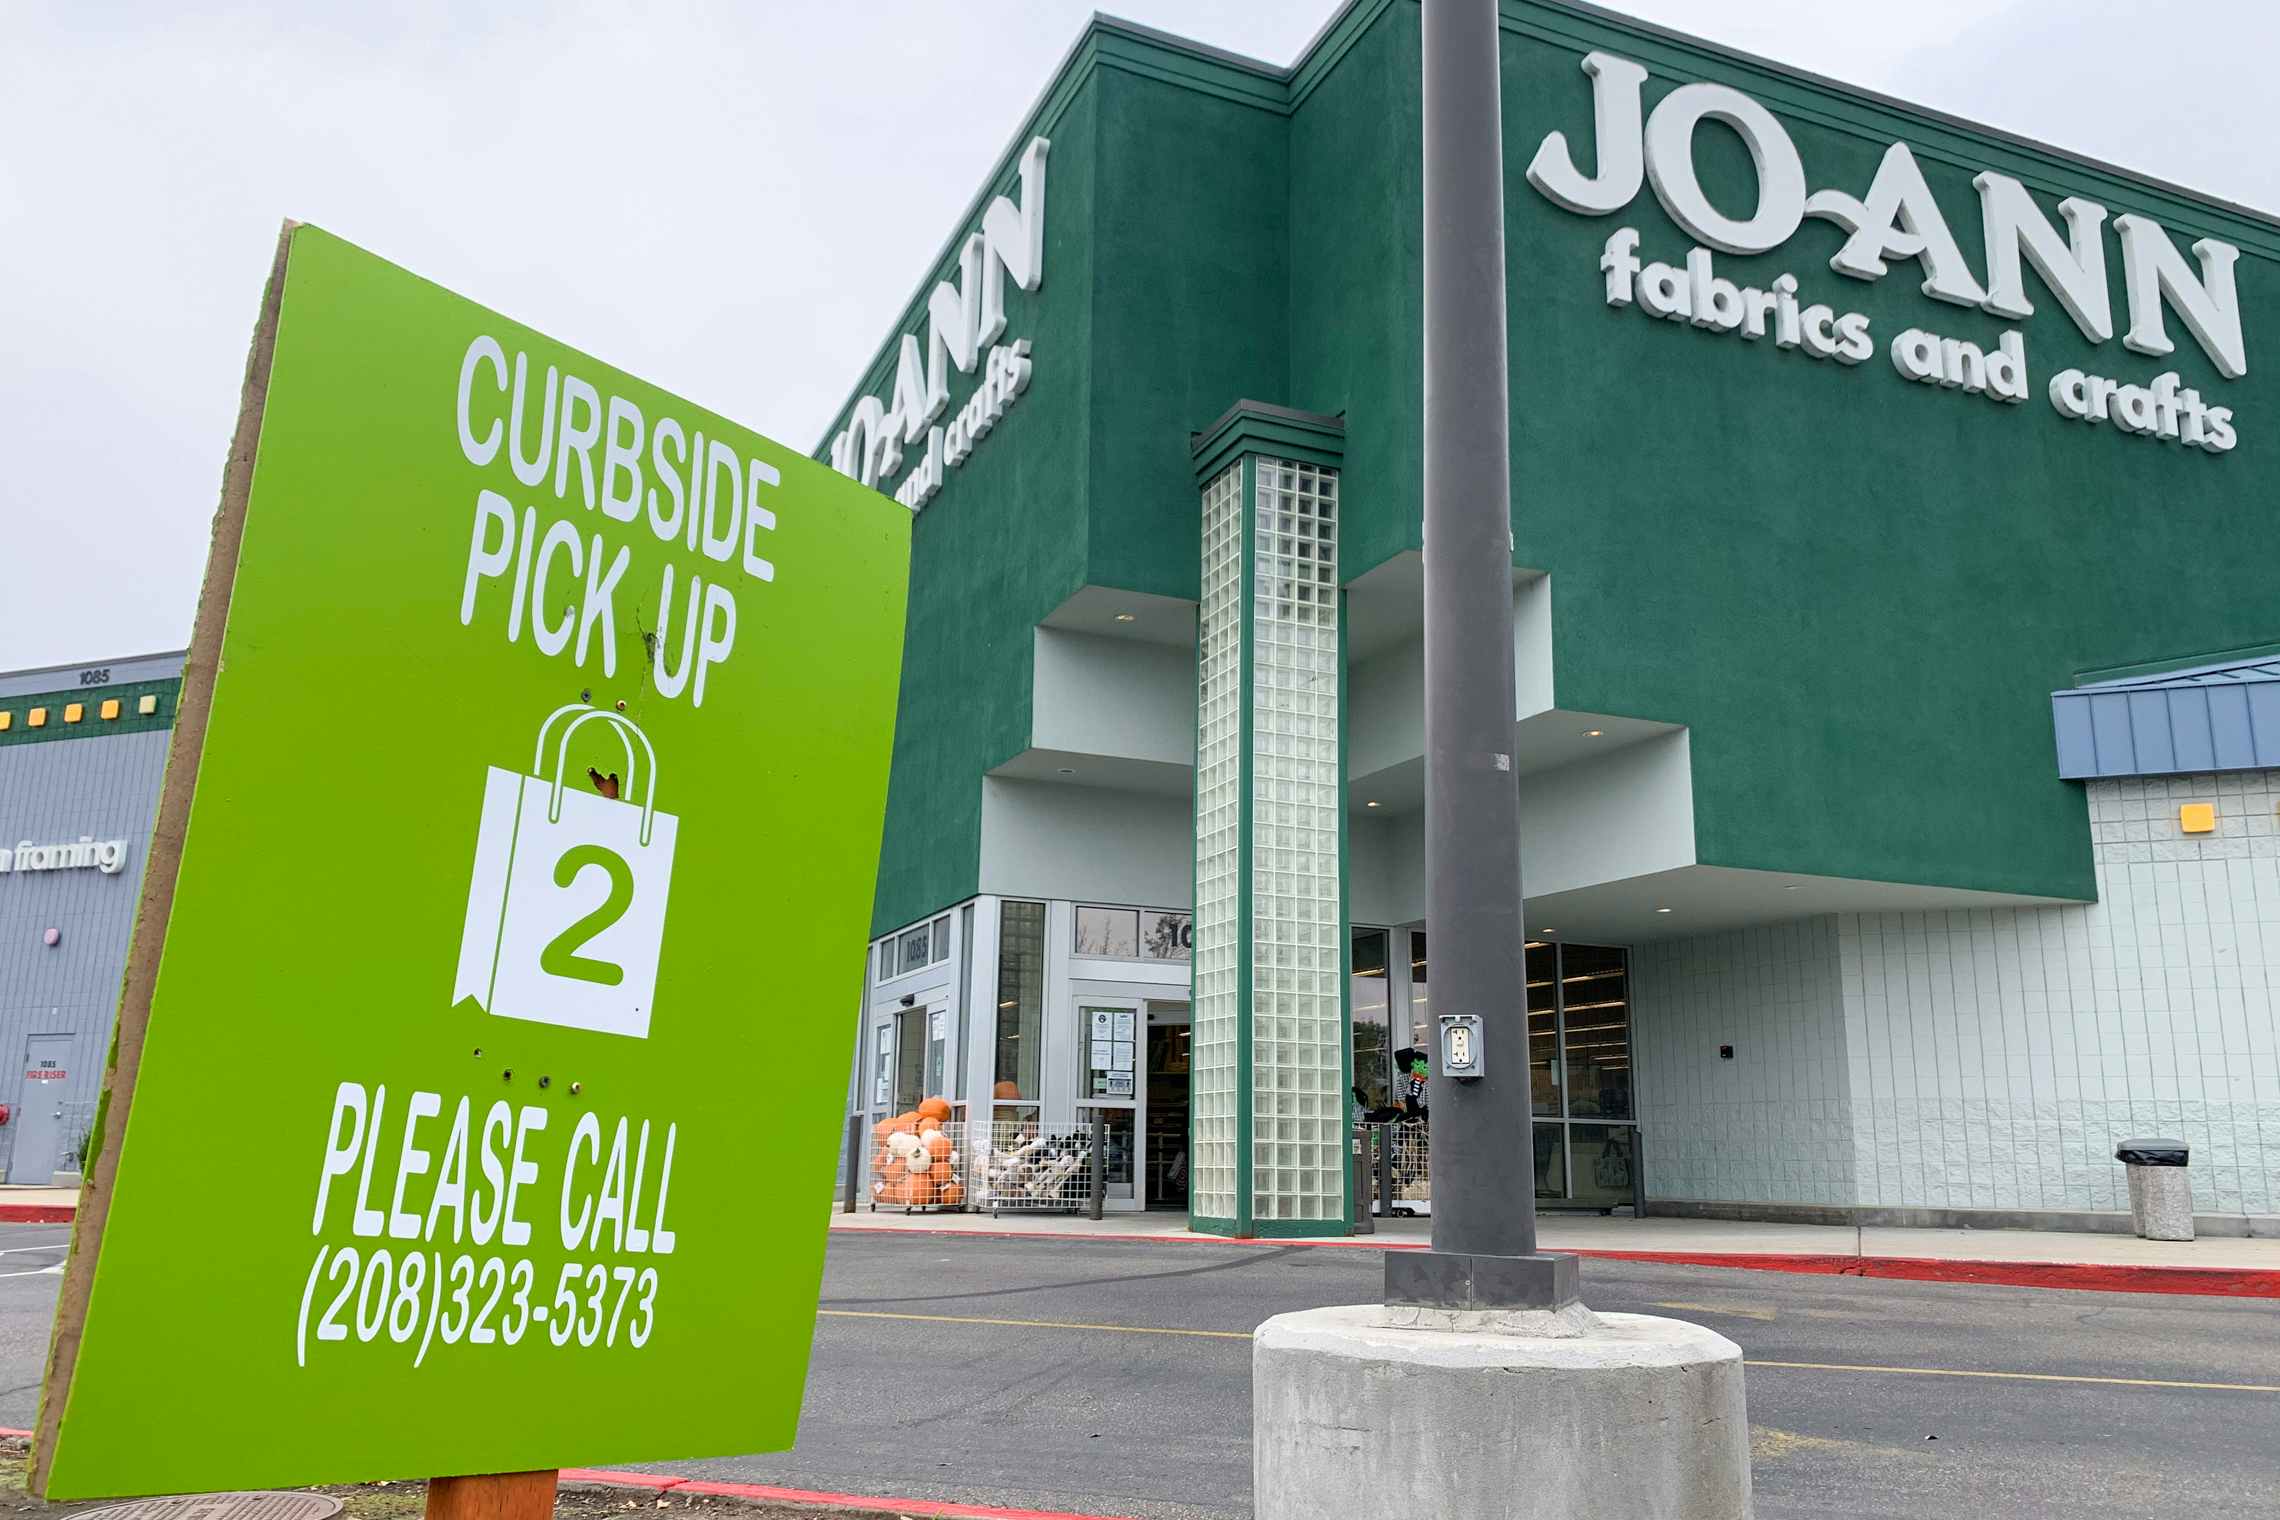 Joann fabrics and crafts store front with curbside pickup sign